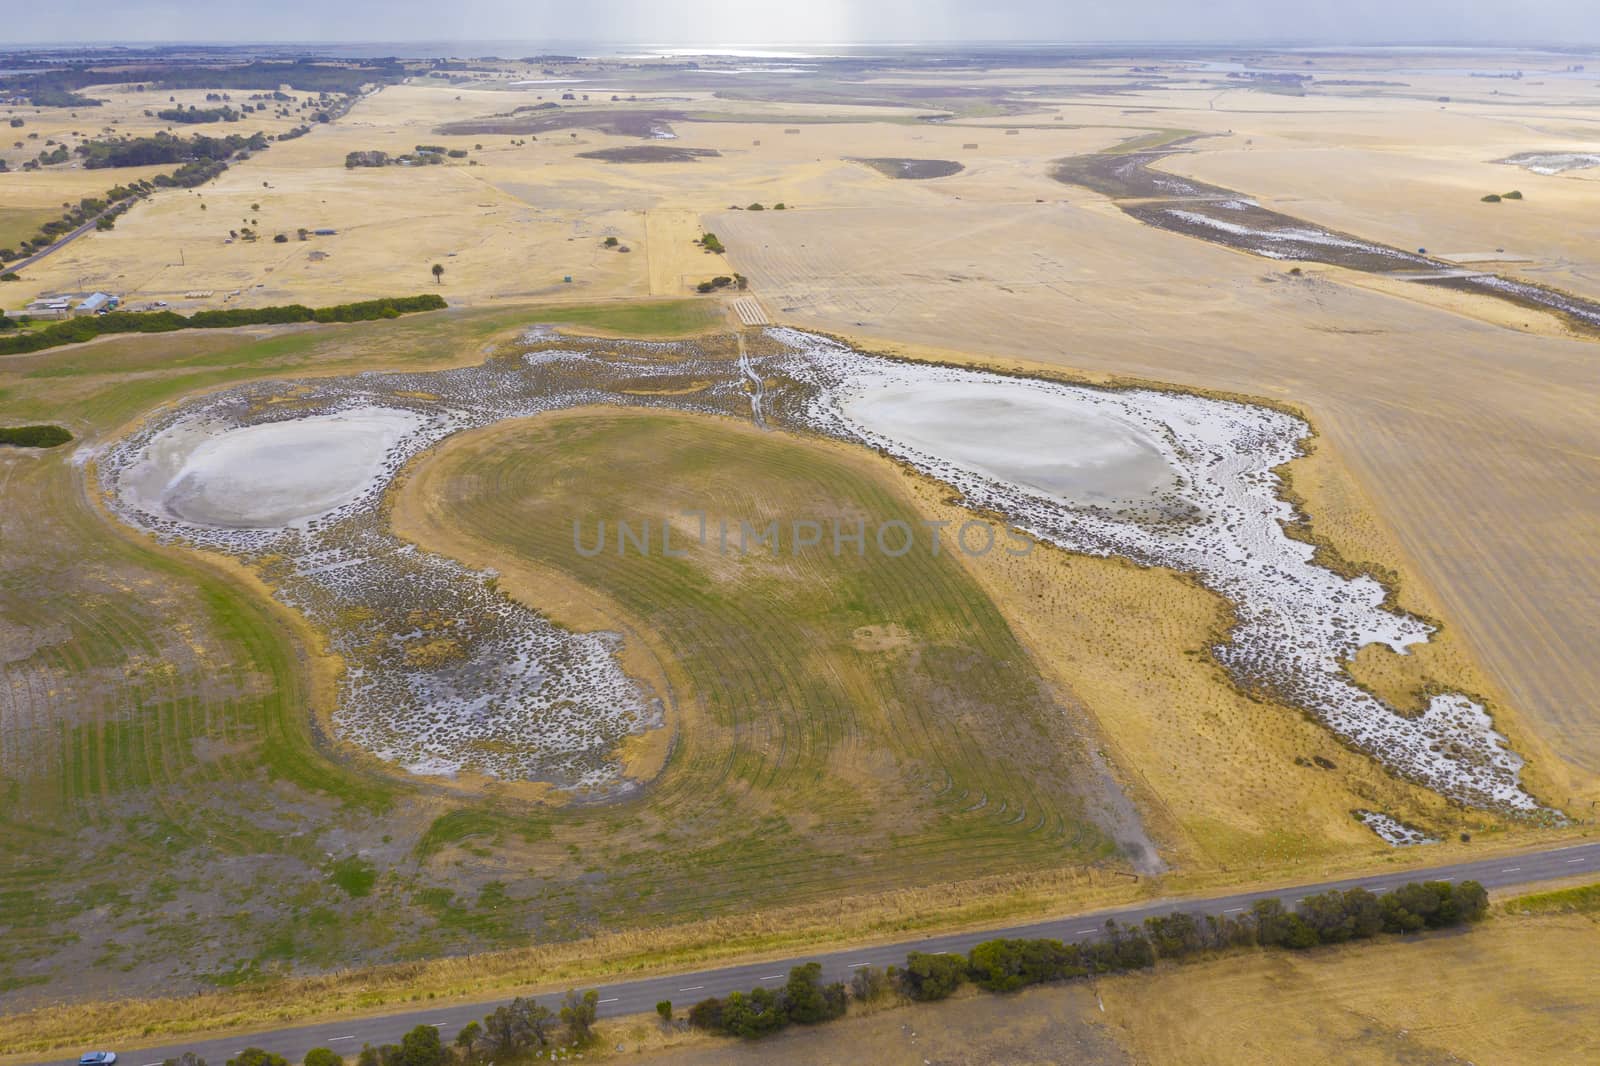 Aerial view of an irrigation dam affected by severe drought in regional Australia by WittkePhotos